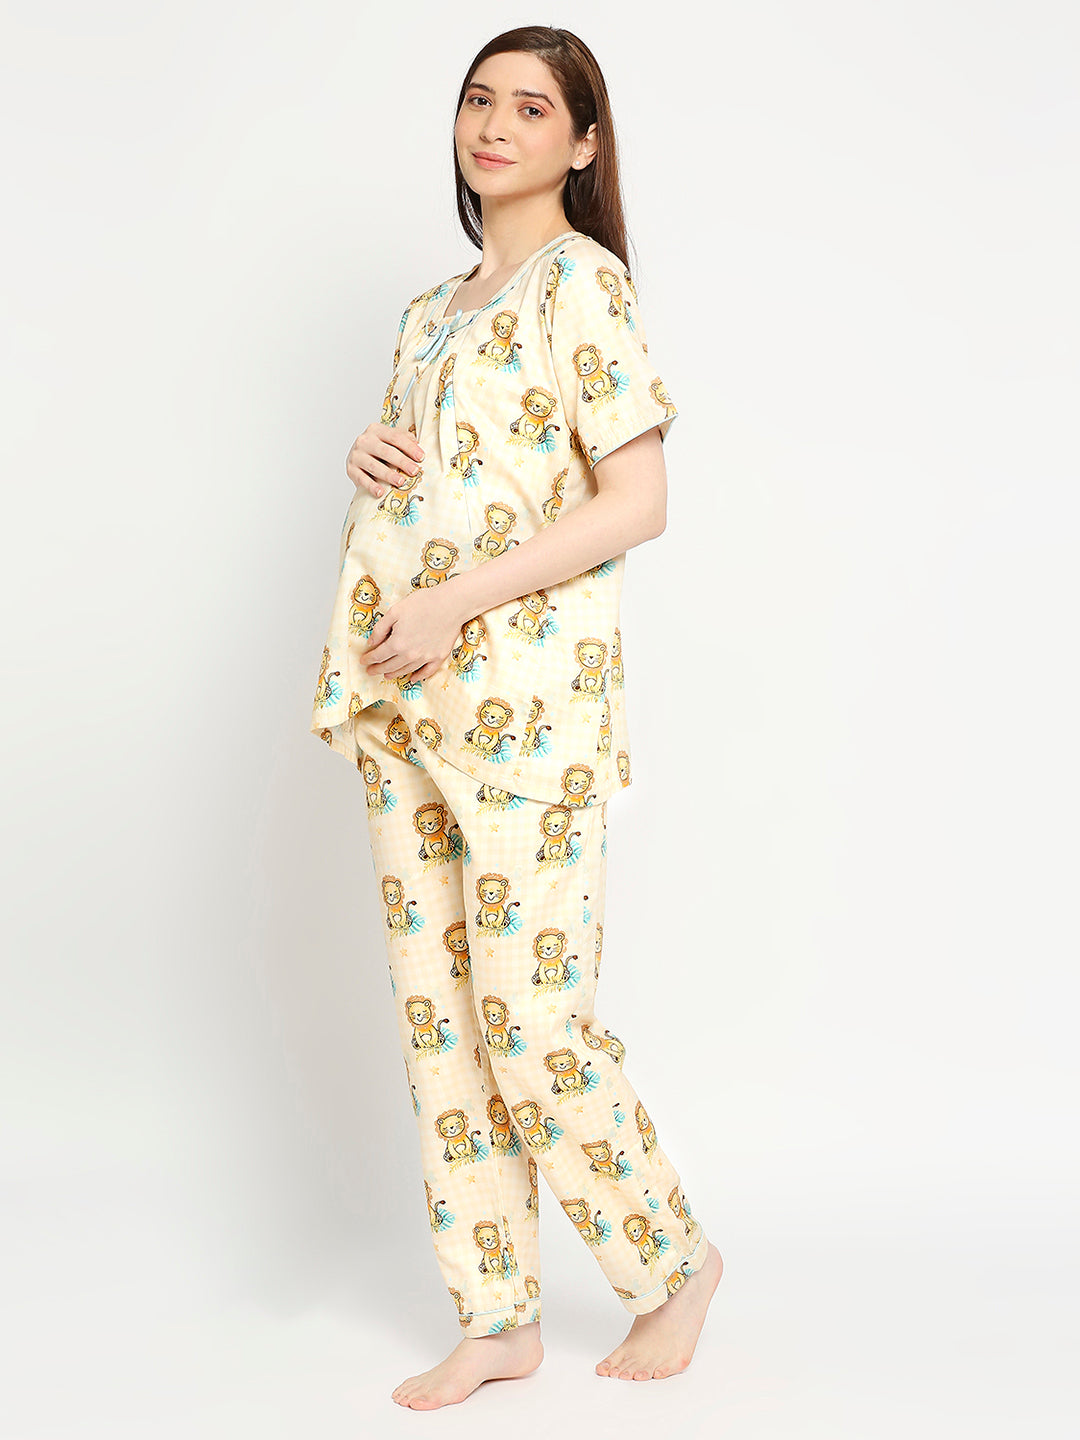 Little Lion  Maternity Pj Set -  Pure Cotton Pj Set in Round Neck with 2 Invisible Zips for Feeding